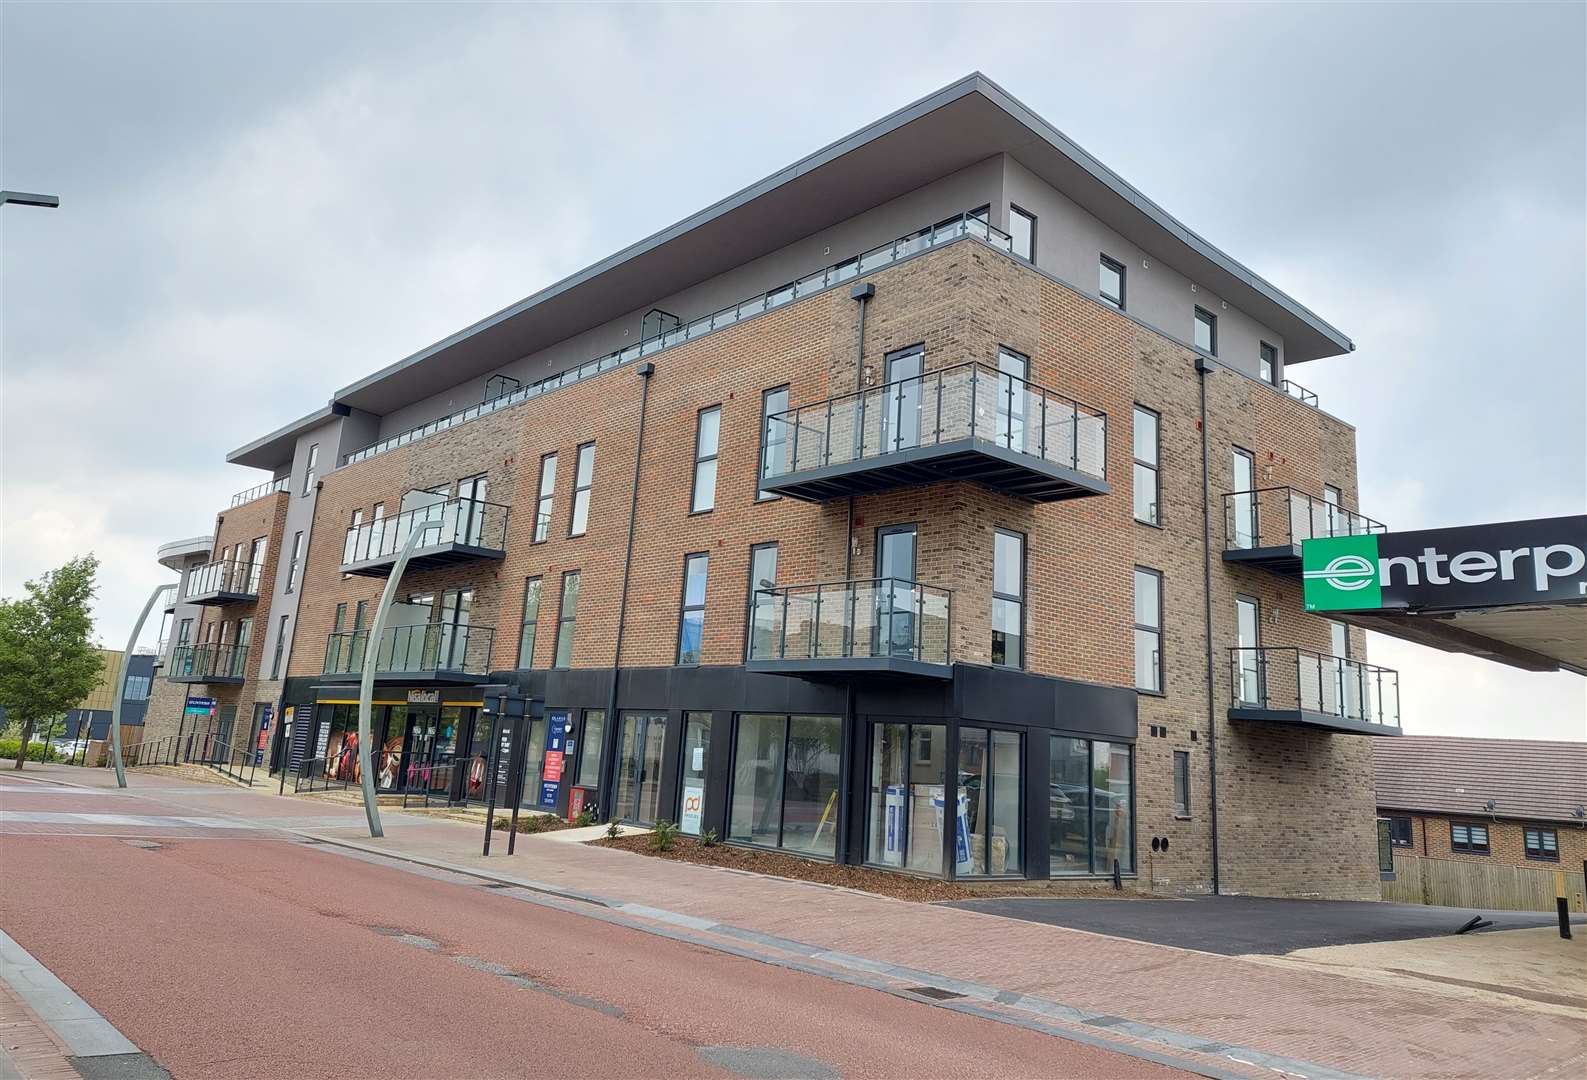 The former Fabric Warehouse site is now home to 28 flats and a Nisa shop